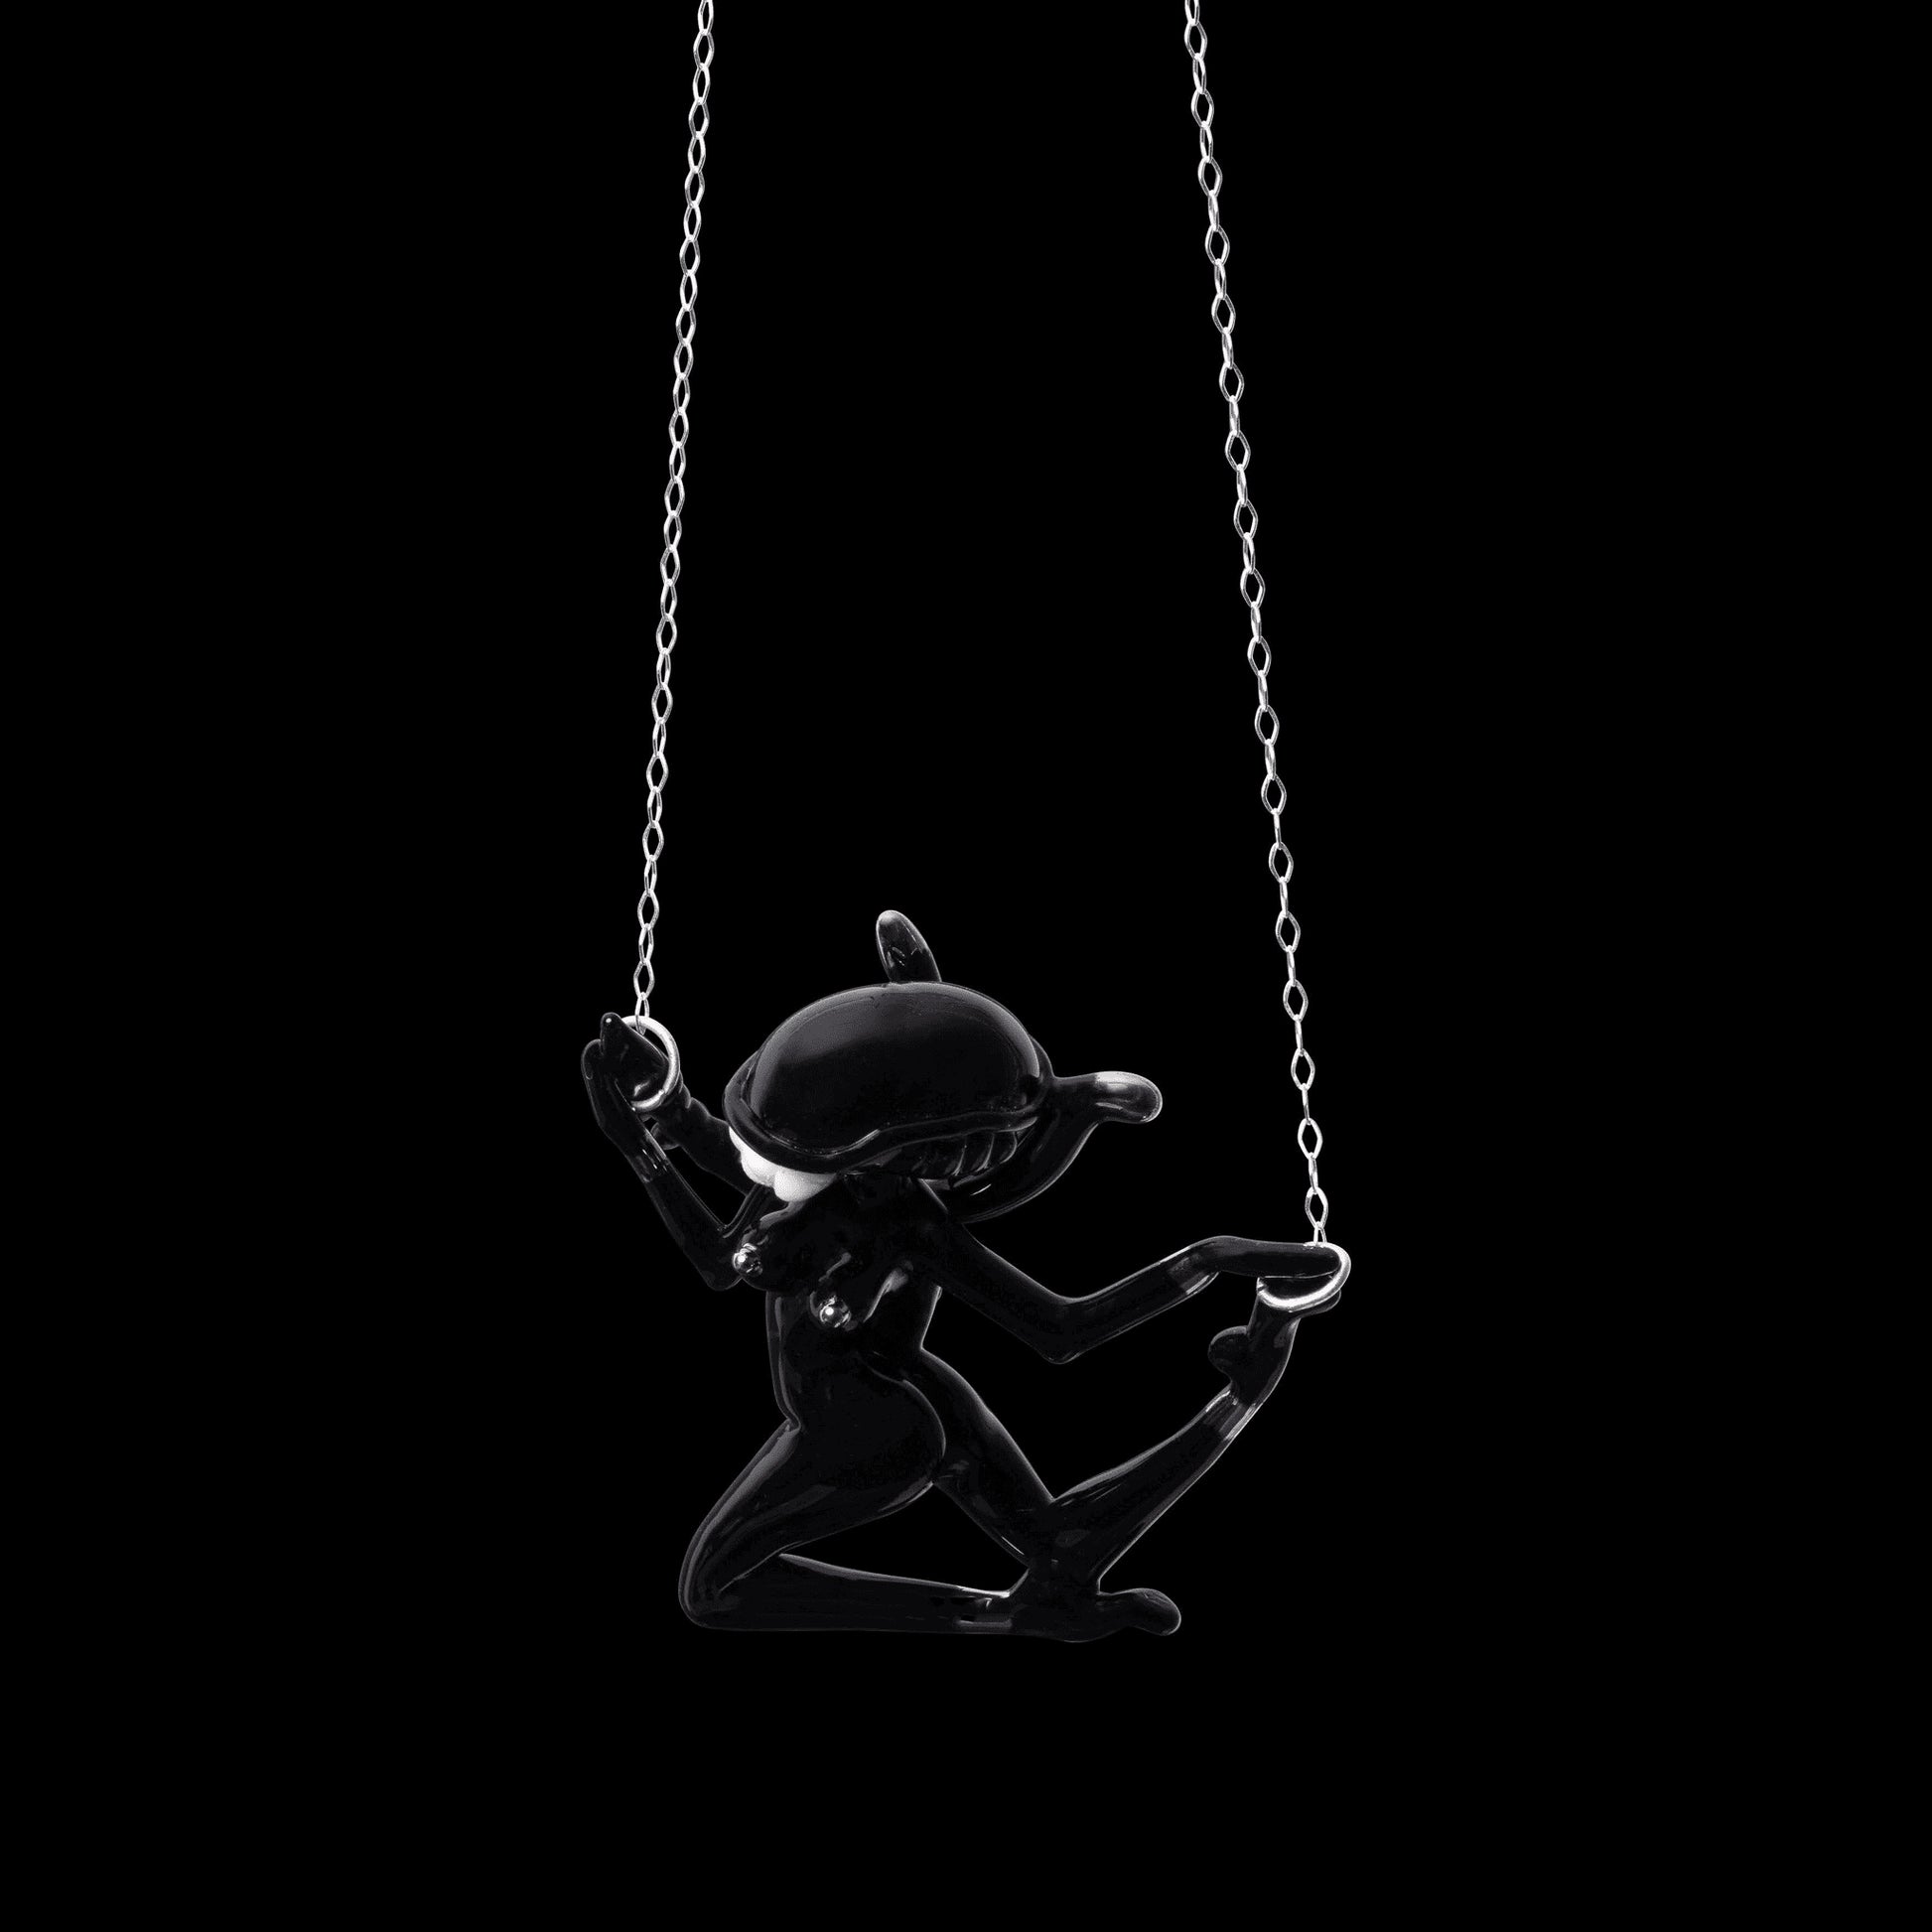 luxurious glass pendant - Collab Xenomorph Pendant by Sibelley x Tiefling (Cyber Punks 2022 Release)